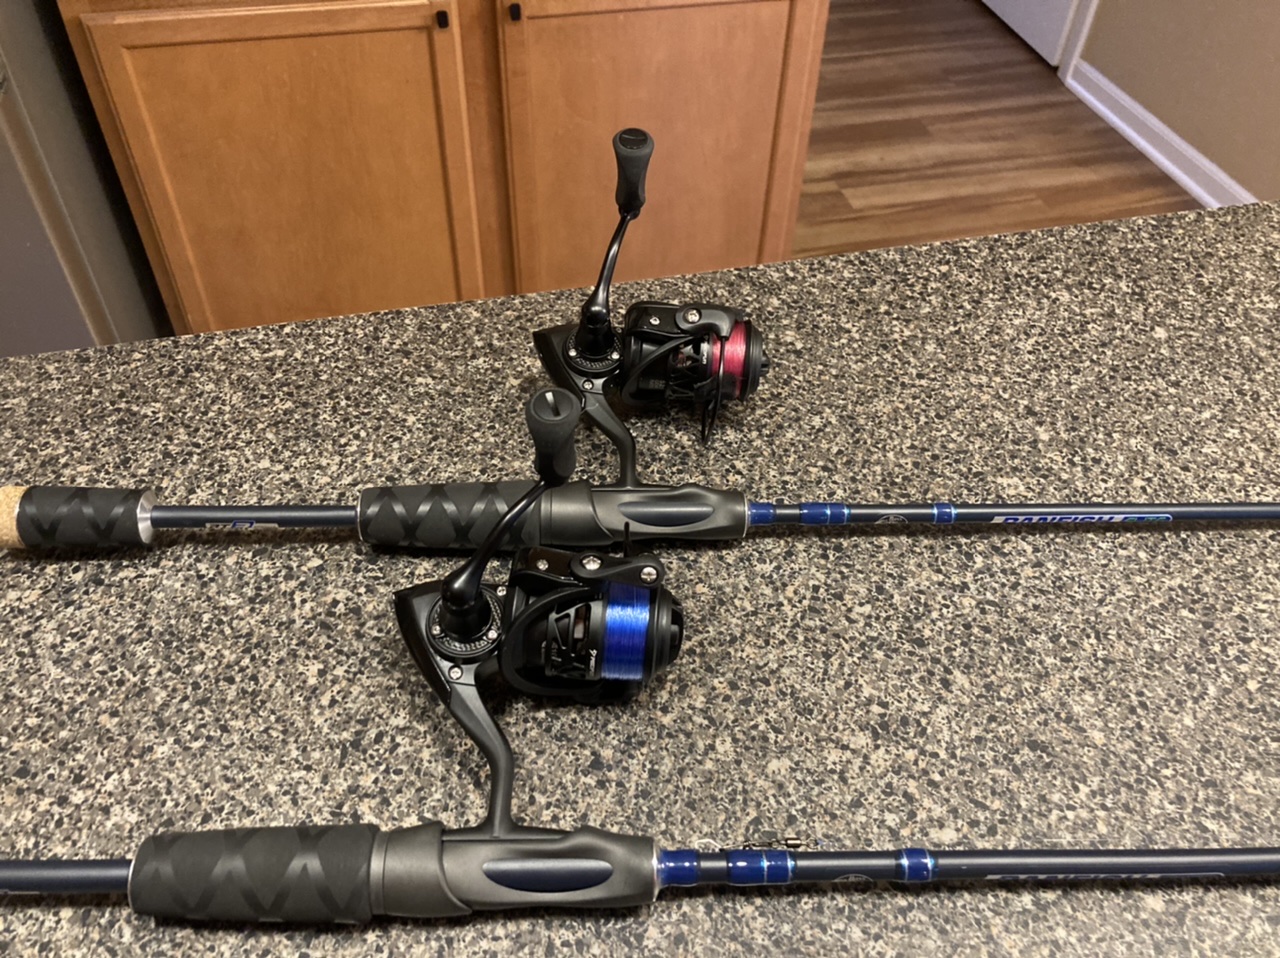 Fle-Fly's new spinning rod, reel offer smooth, sensitive panfish combo